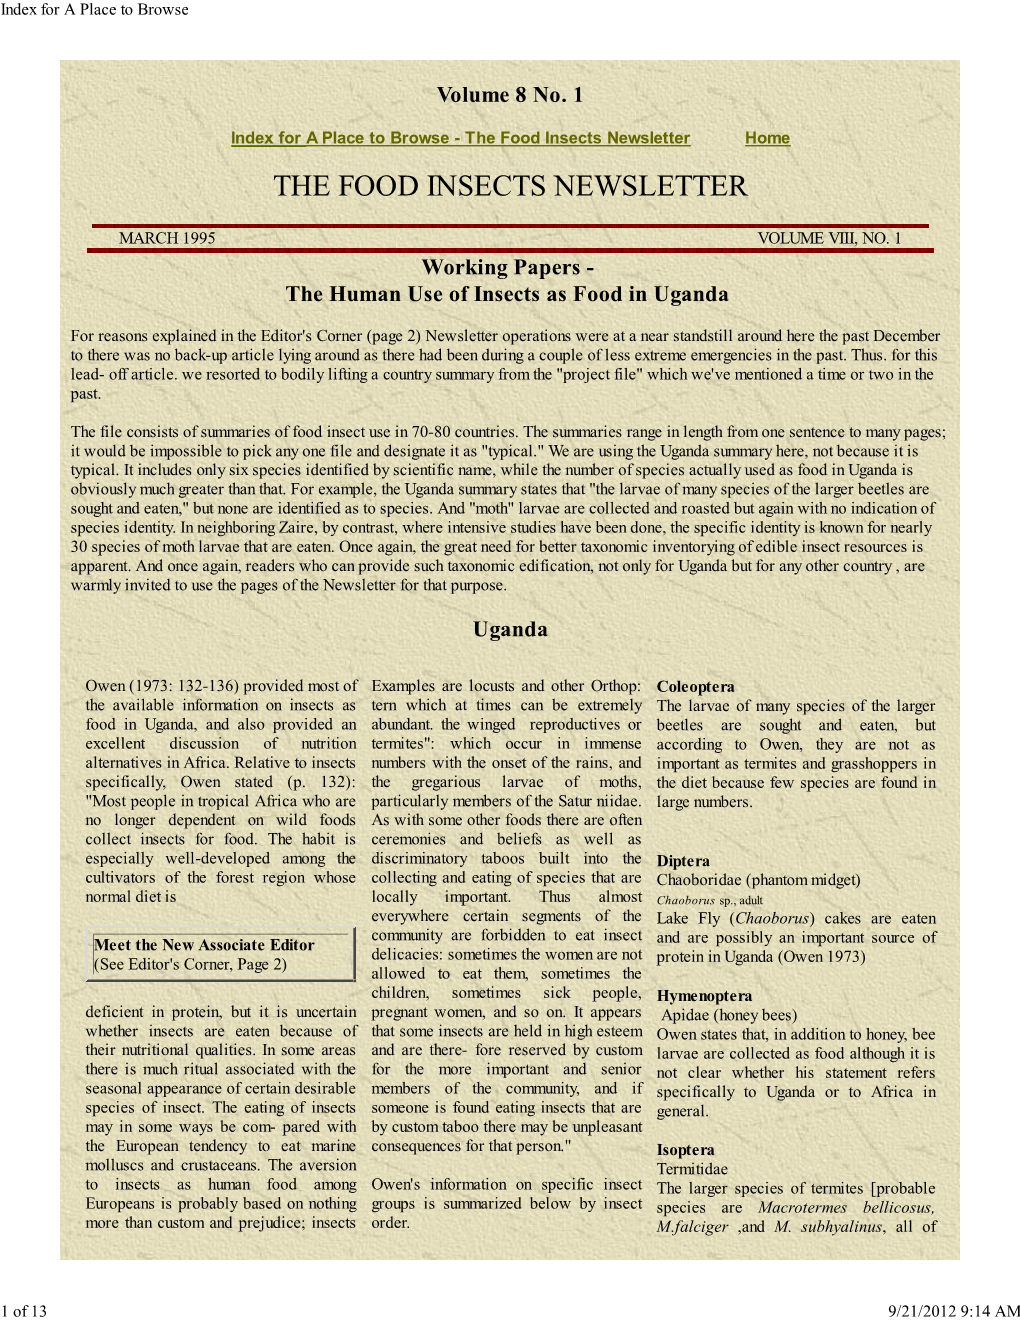 The Food Insects Newsletter Home the FOOD INSECTS NEWSLETTER